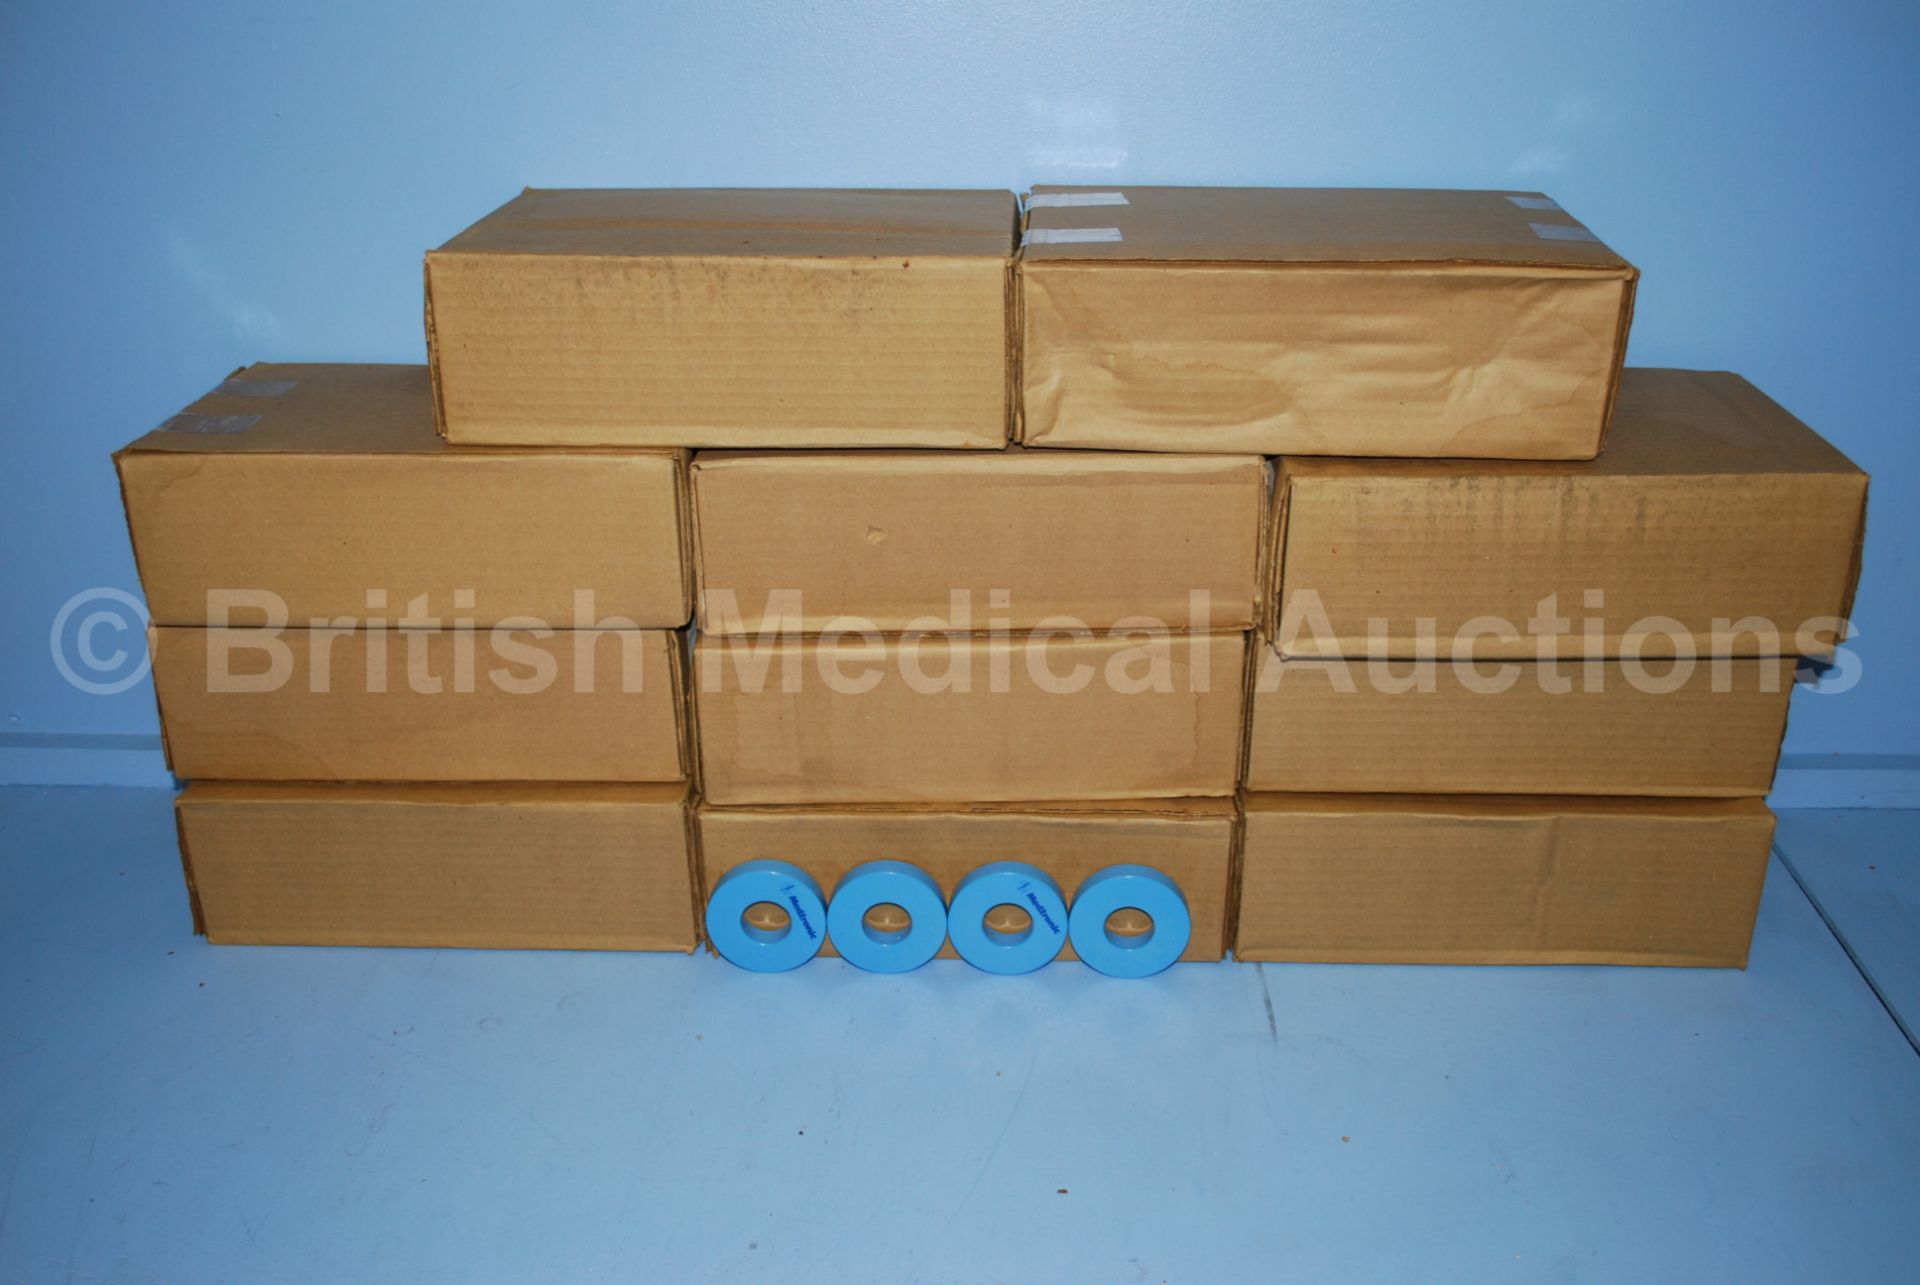 11 x Boxes of 4 Medtronic Patient Magnets (Brand N